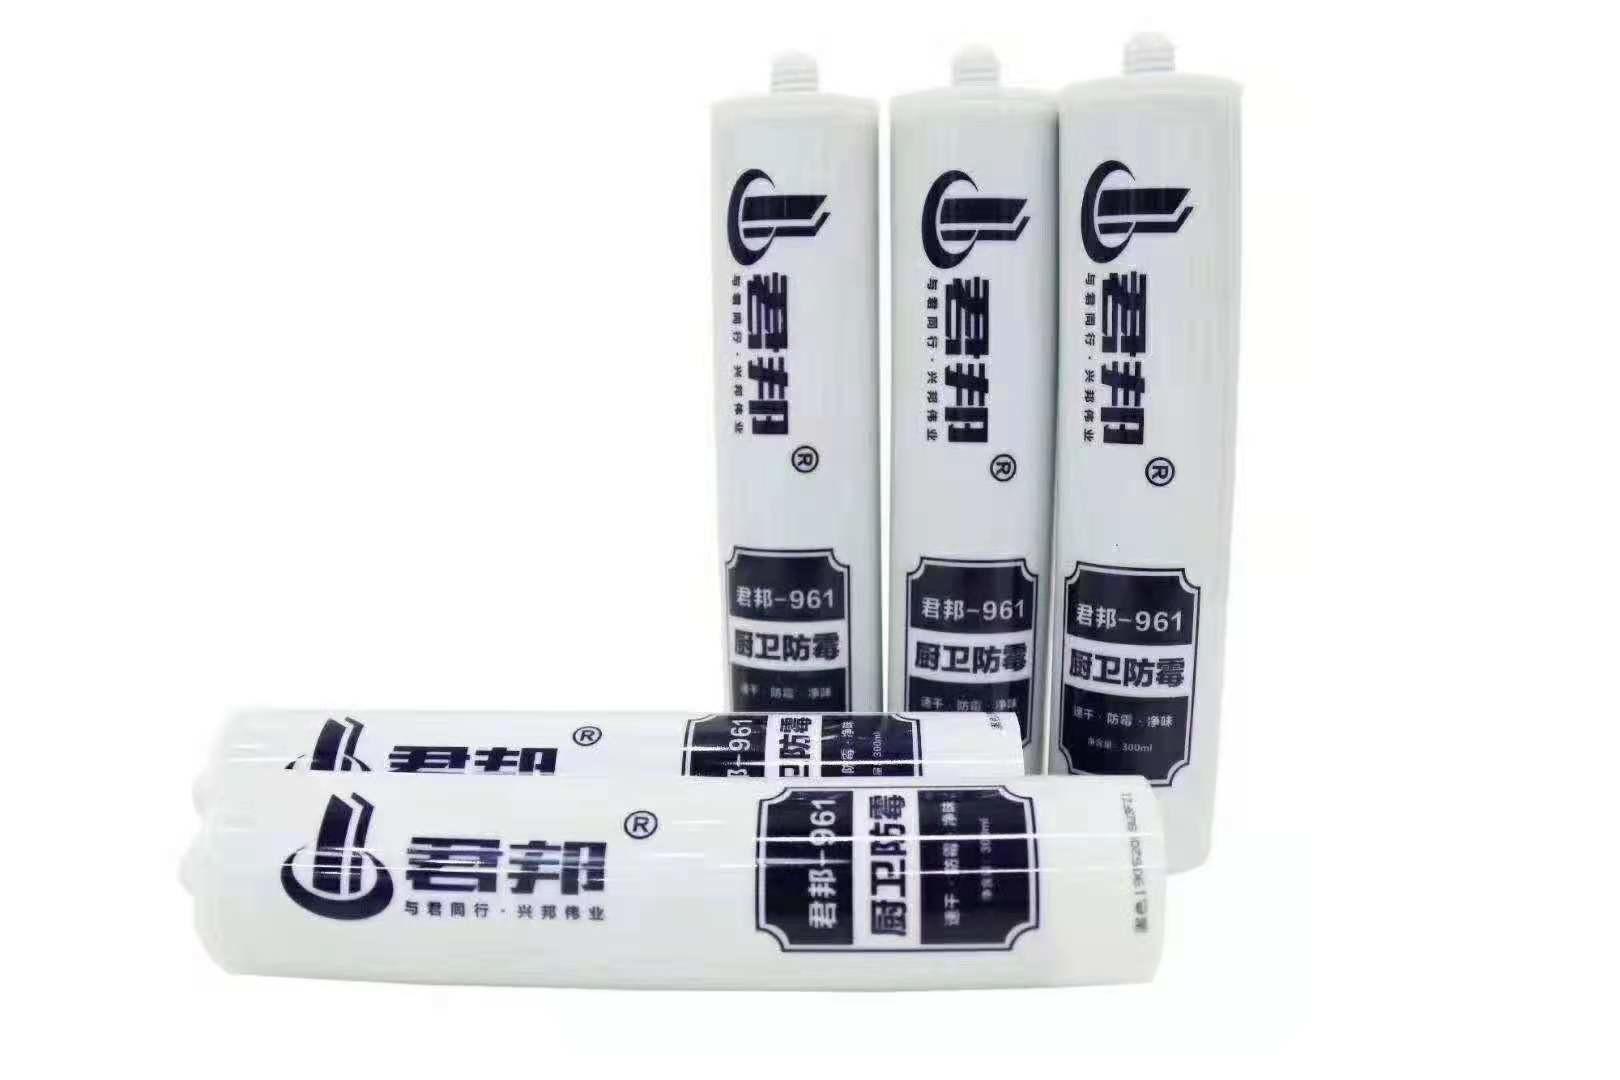  Odourless Glazing Neutral Silicone Sealant 280ml Clear Silicone Waterproof Sealant Manufactures